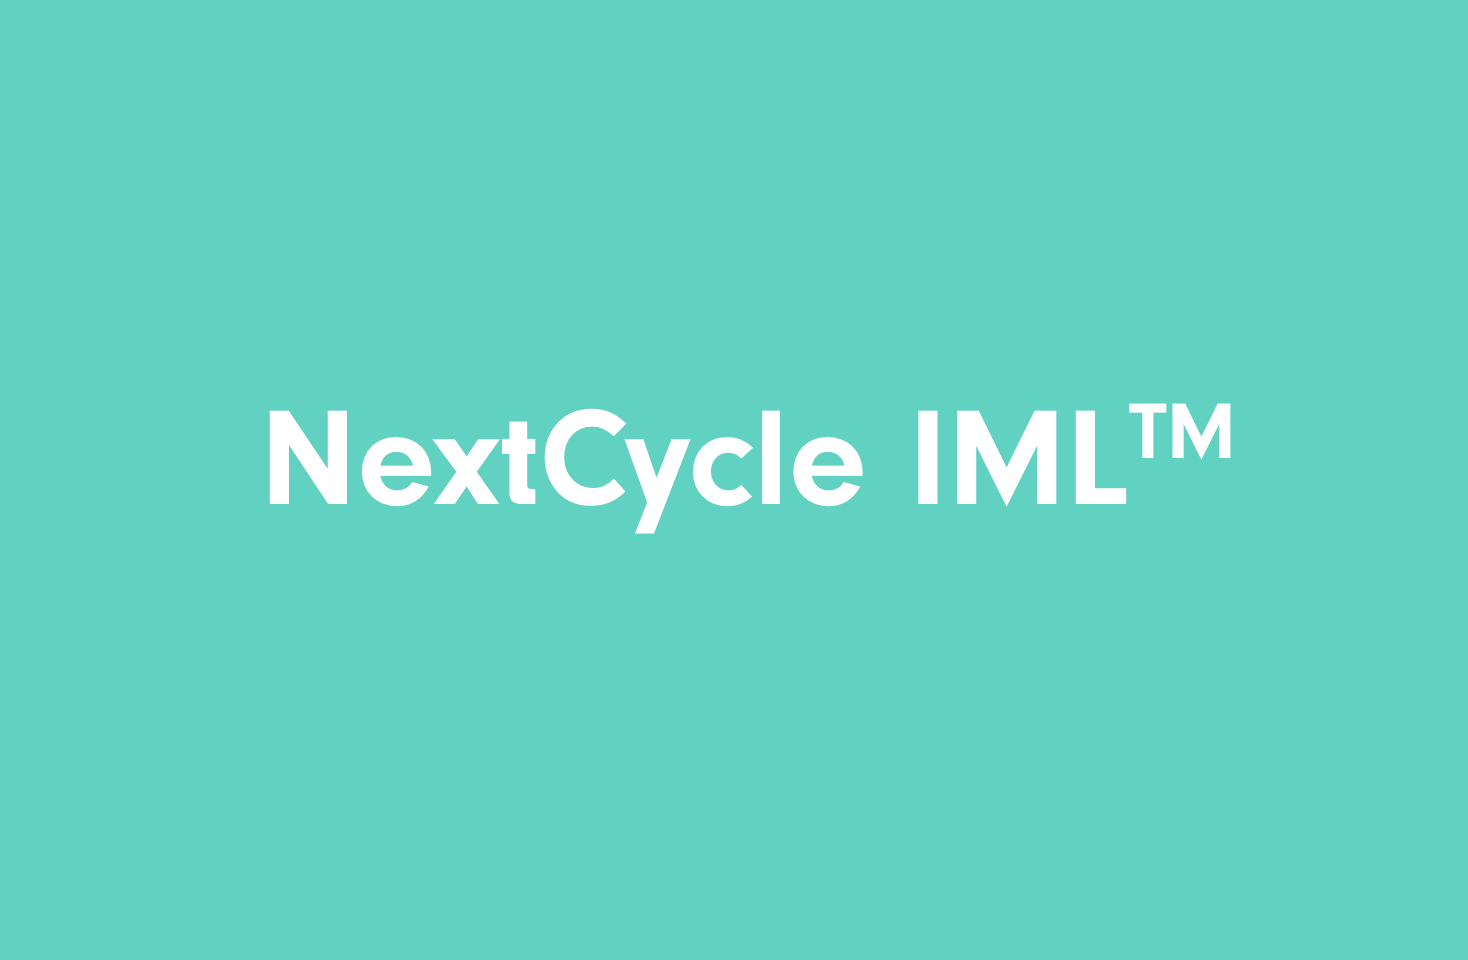 Image of MCC Verstraete sets a complete new standard for future sustainable IML packaging with NextCycle IML™